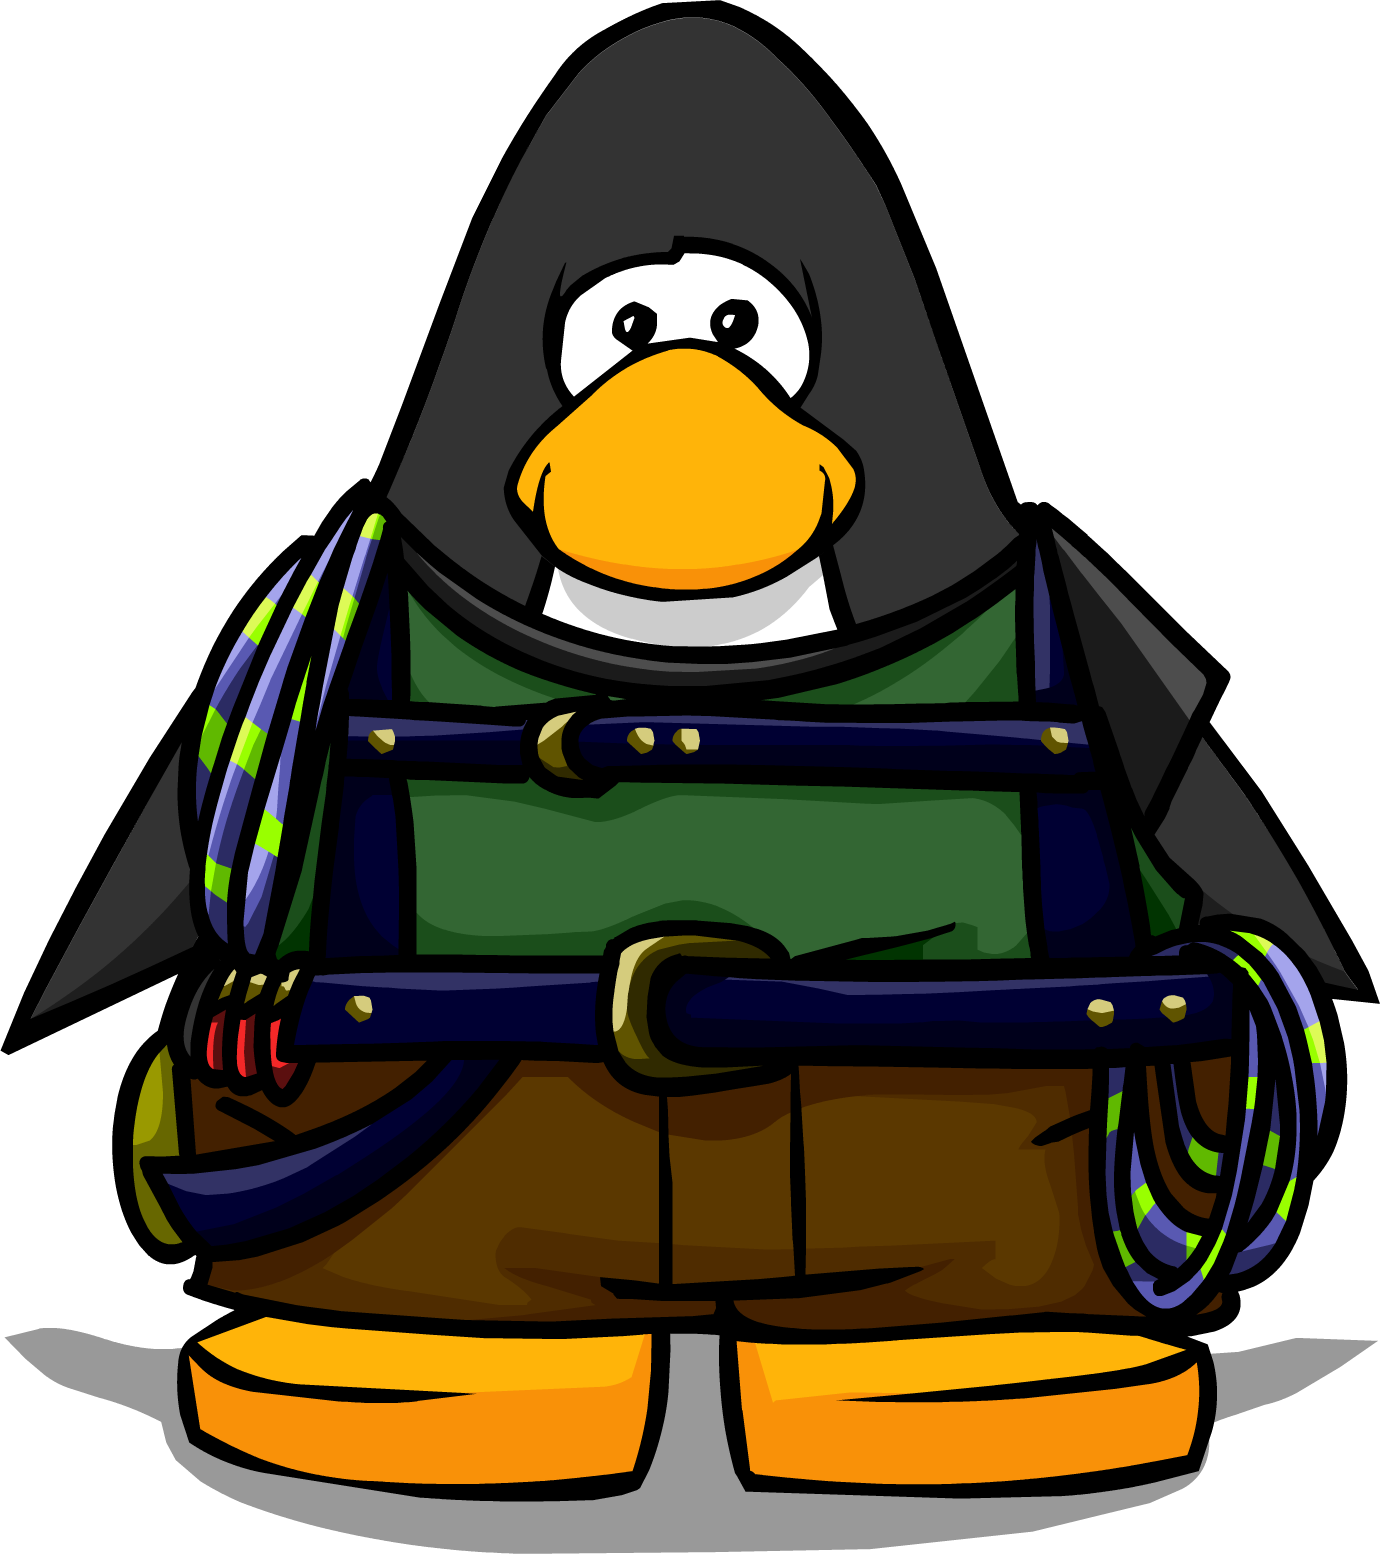 Mountain Climber Gear On Player Card - Club Penguin Penguin Band Hoodie (1380x1554)